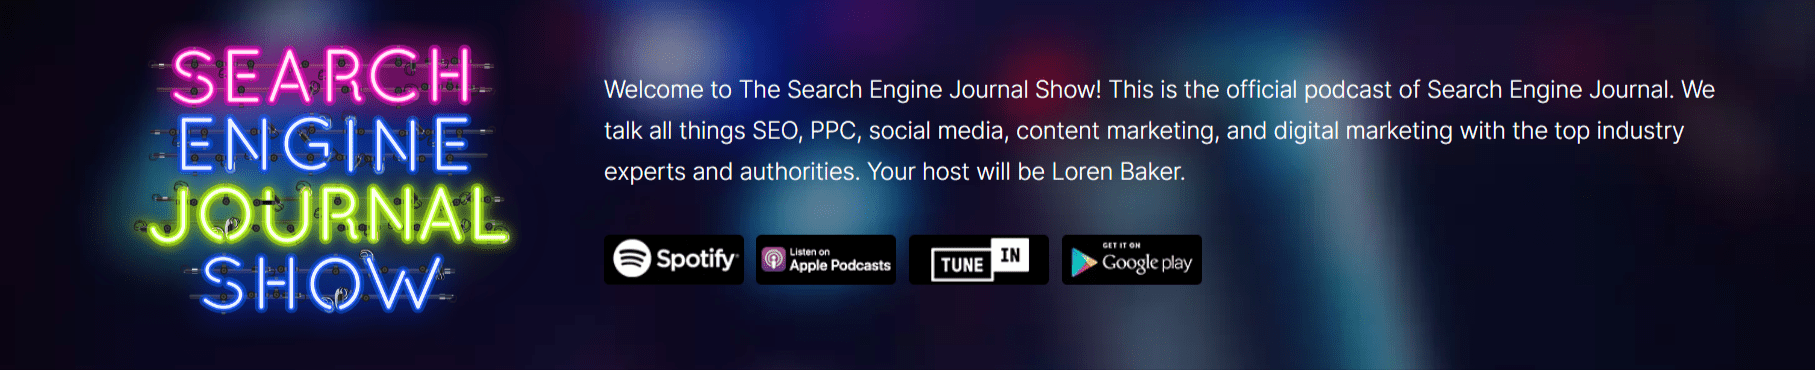 The Search Engine Journal Show_ A Podcast for SEO & Marketing Pros